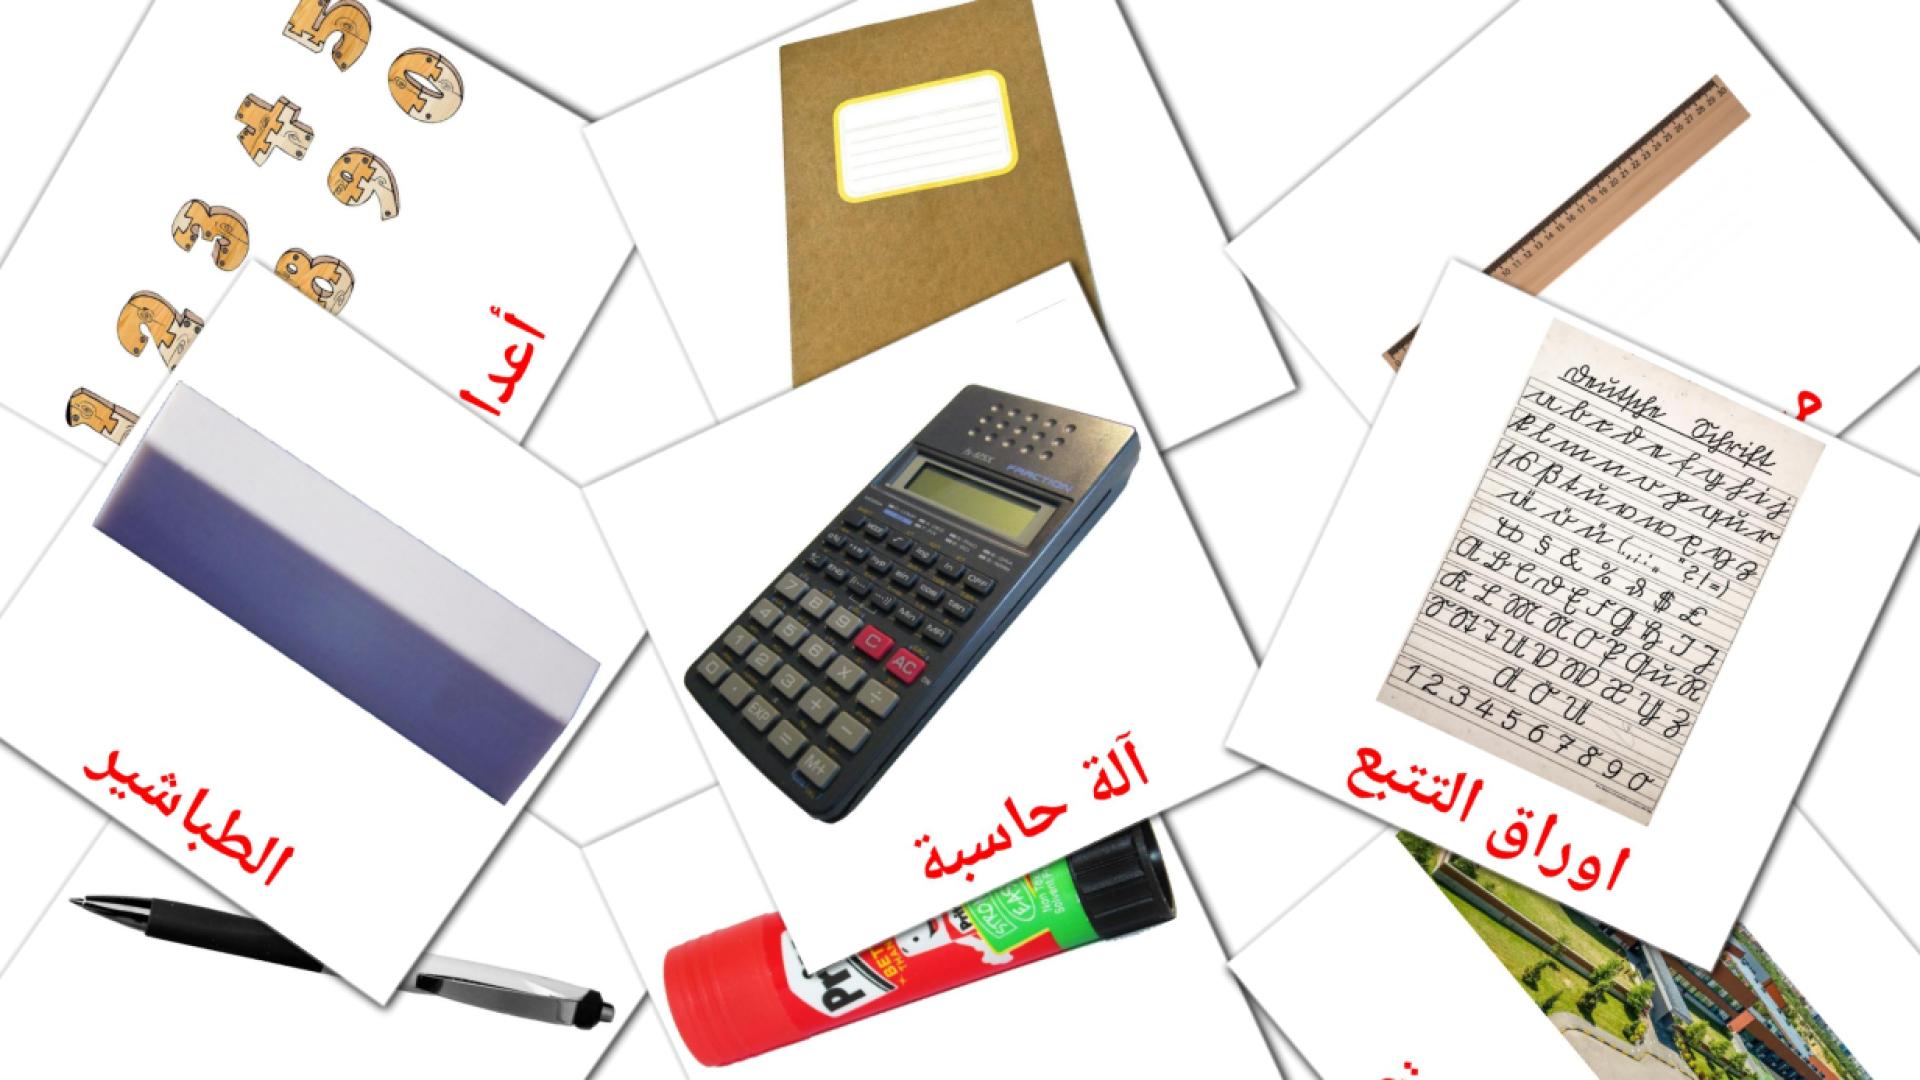 Classroom objects - arabic vocabulary cards